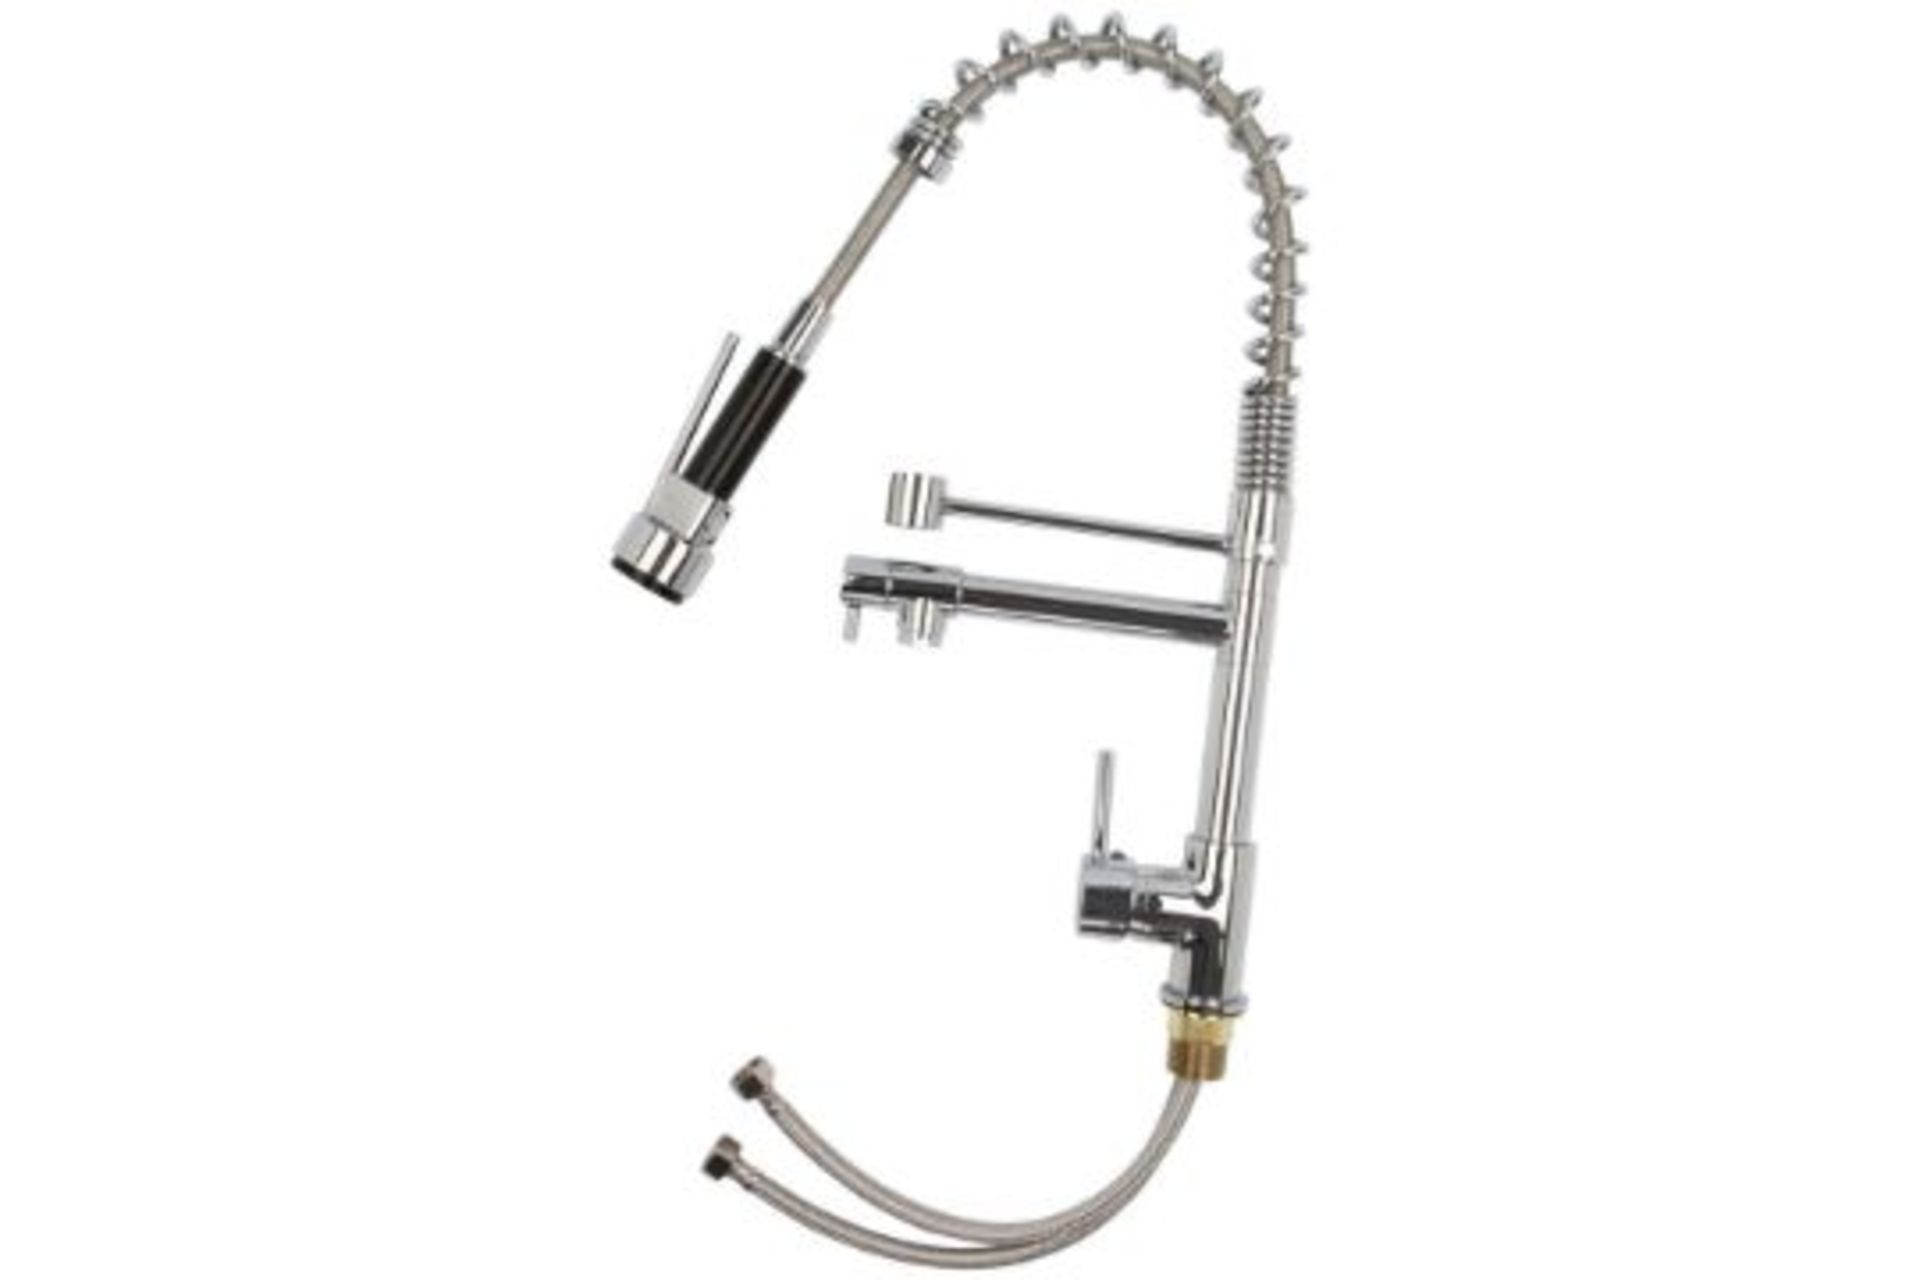 NEW & BOXED Bentley Modern Monobloc Chrome Brass Pull Out Spray Mixer Tap.RRP £349.99.This tap... - Image 2 of 2